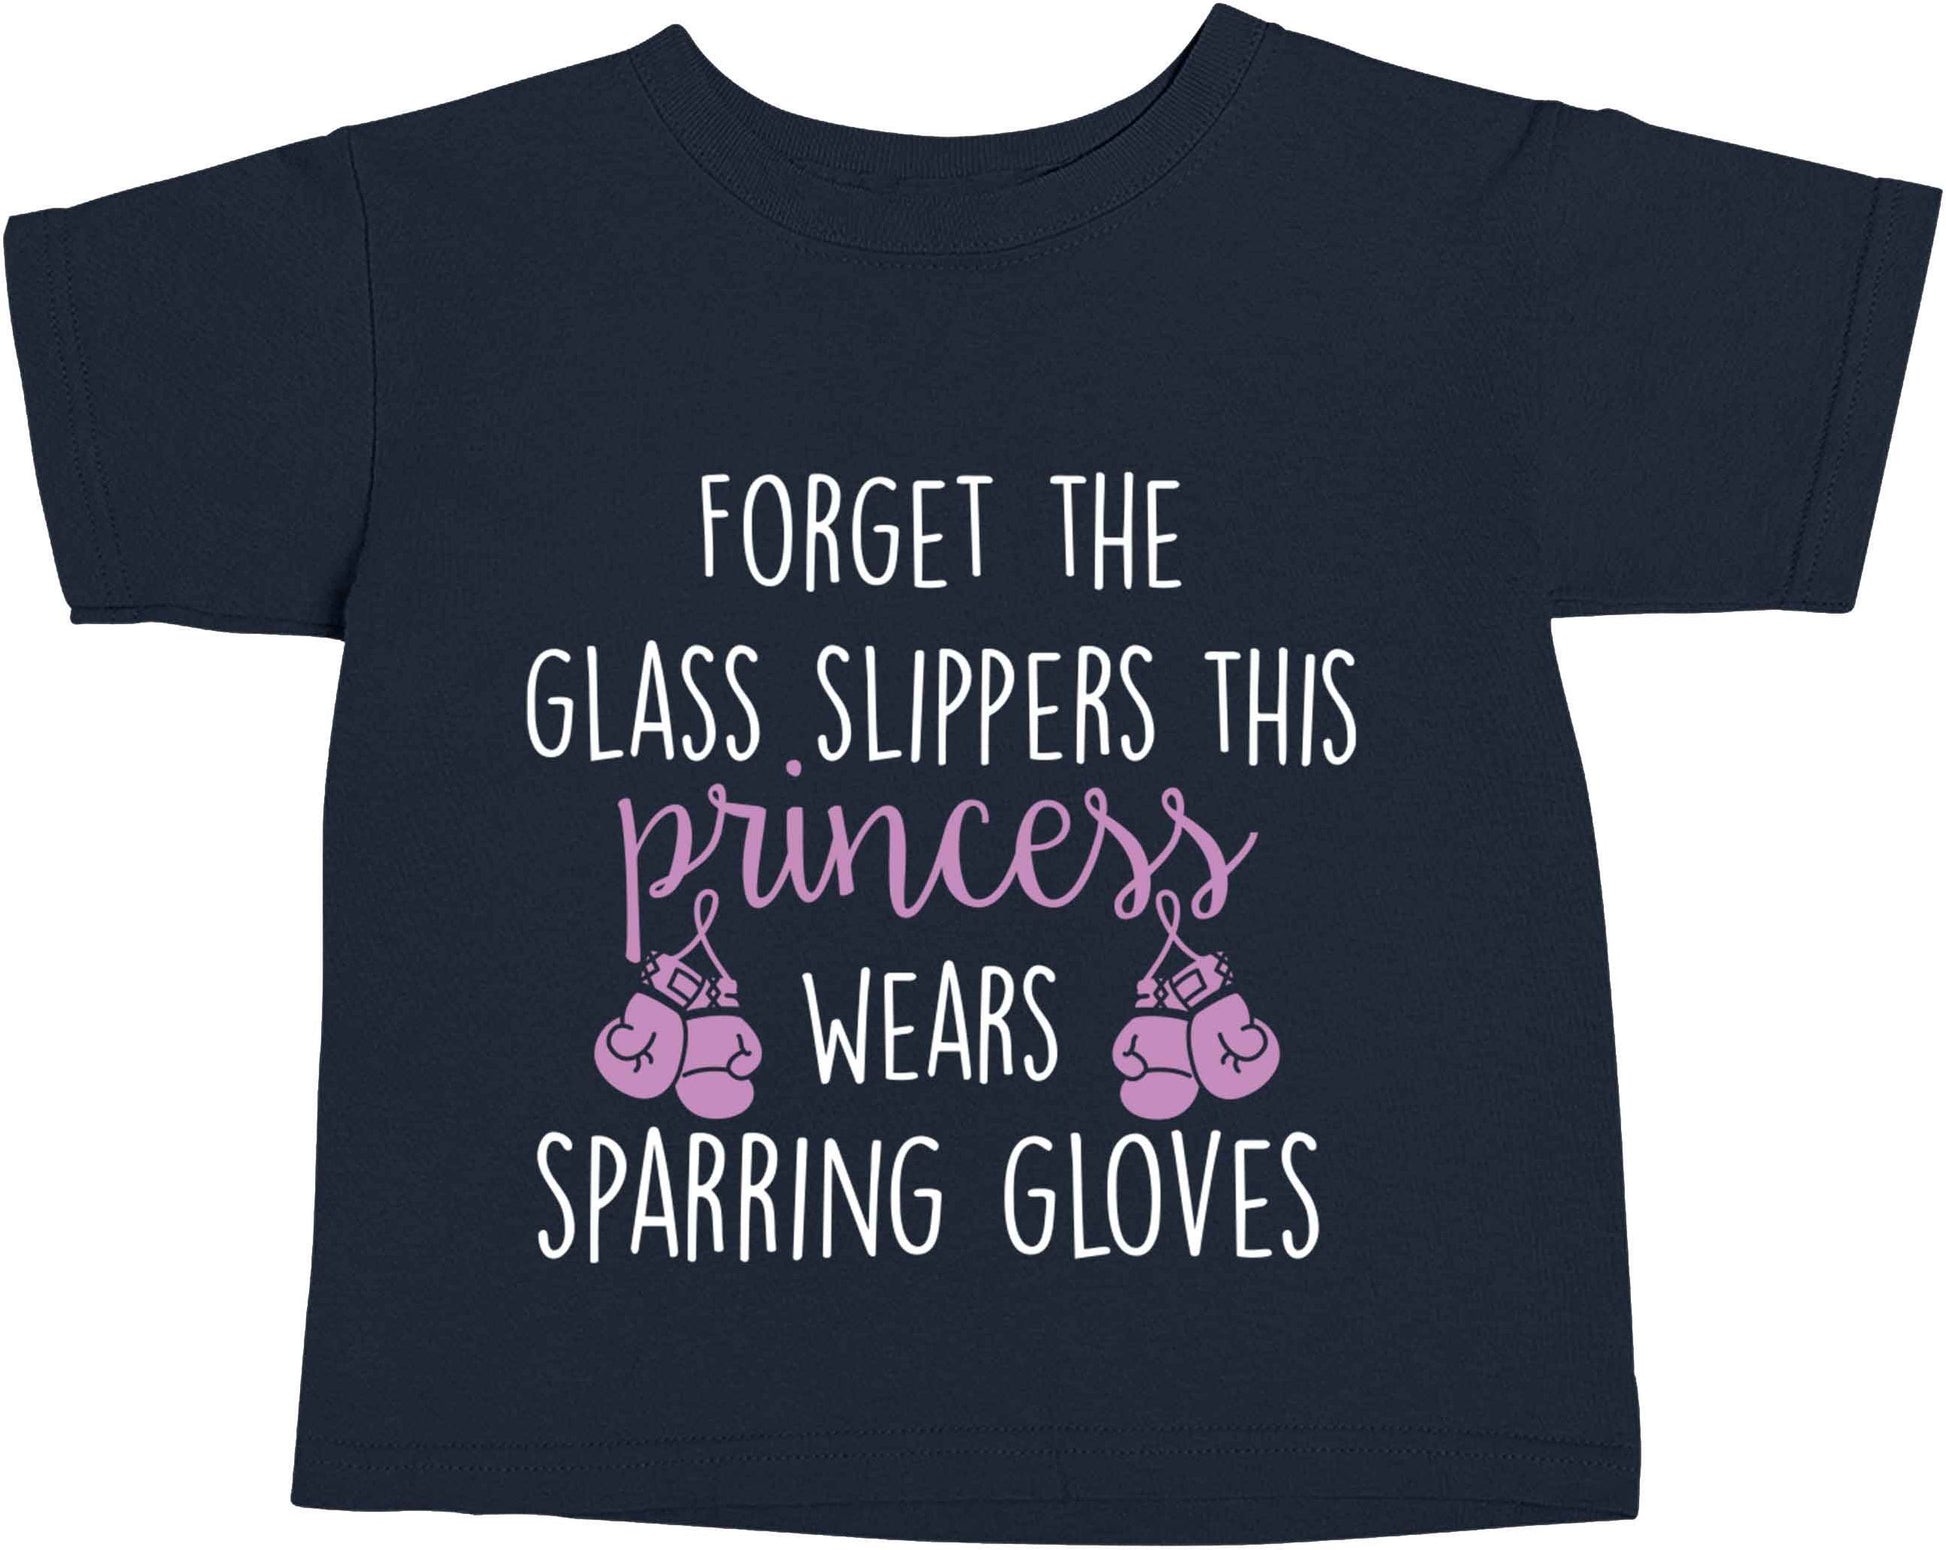 Forget the glass slippers this princess wears sparring gloves navy baby toddler Tshirt 2 Years